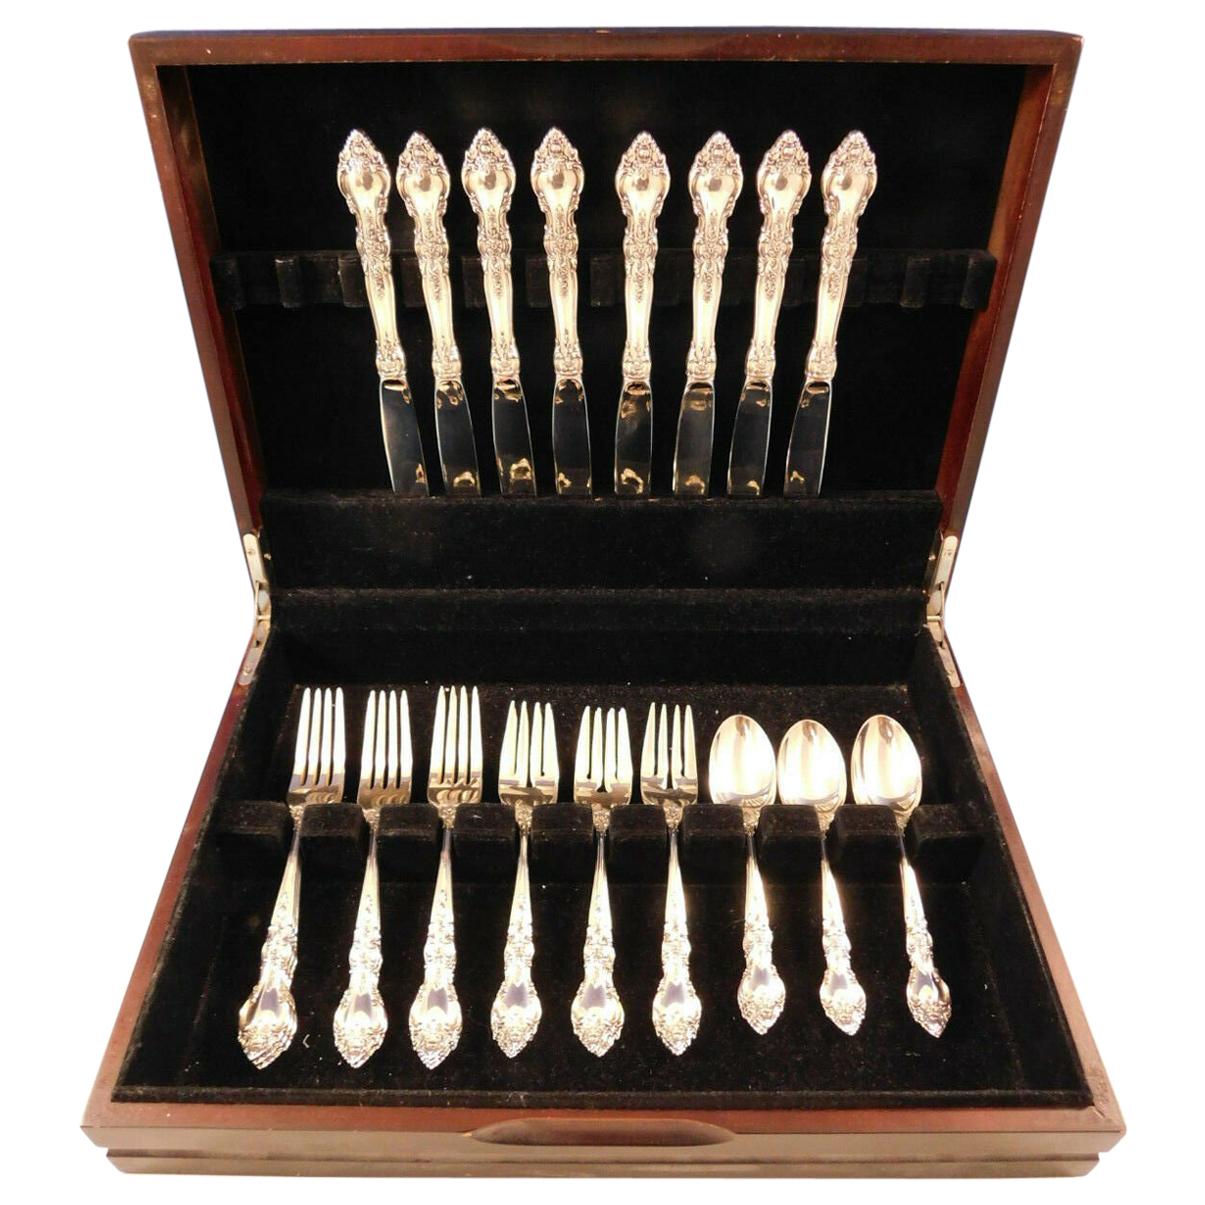 Belvedere by Lunt Sterling Silver Flatware Set for 8 Service 32 Pieces